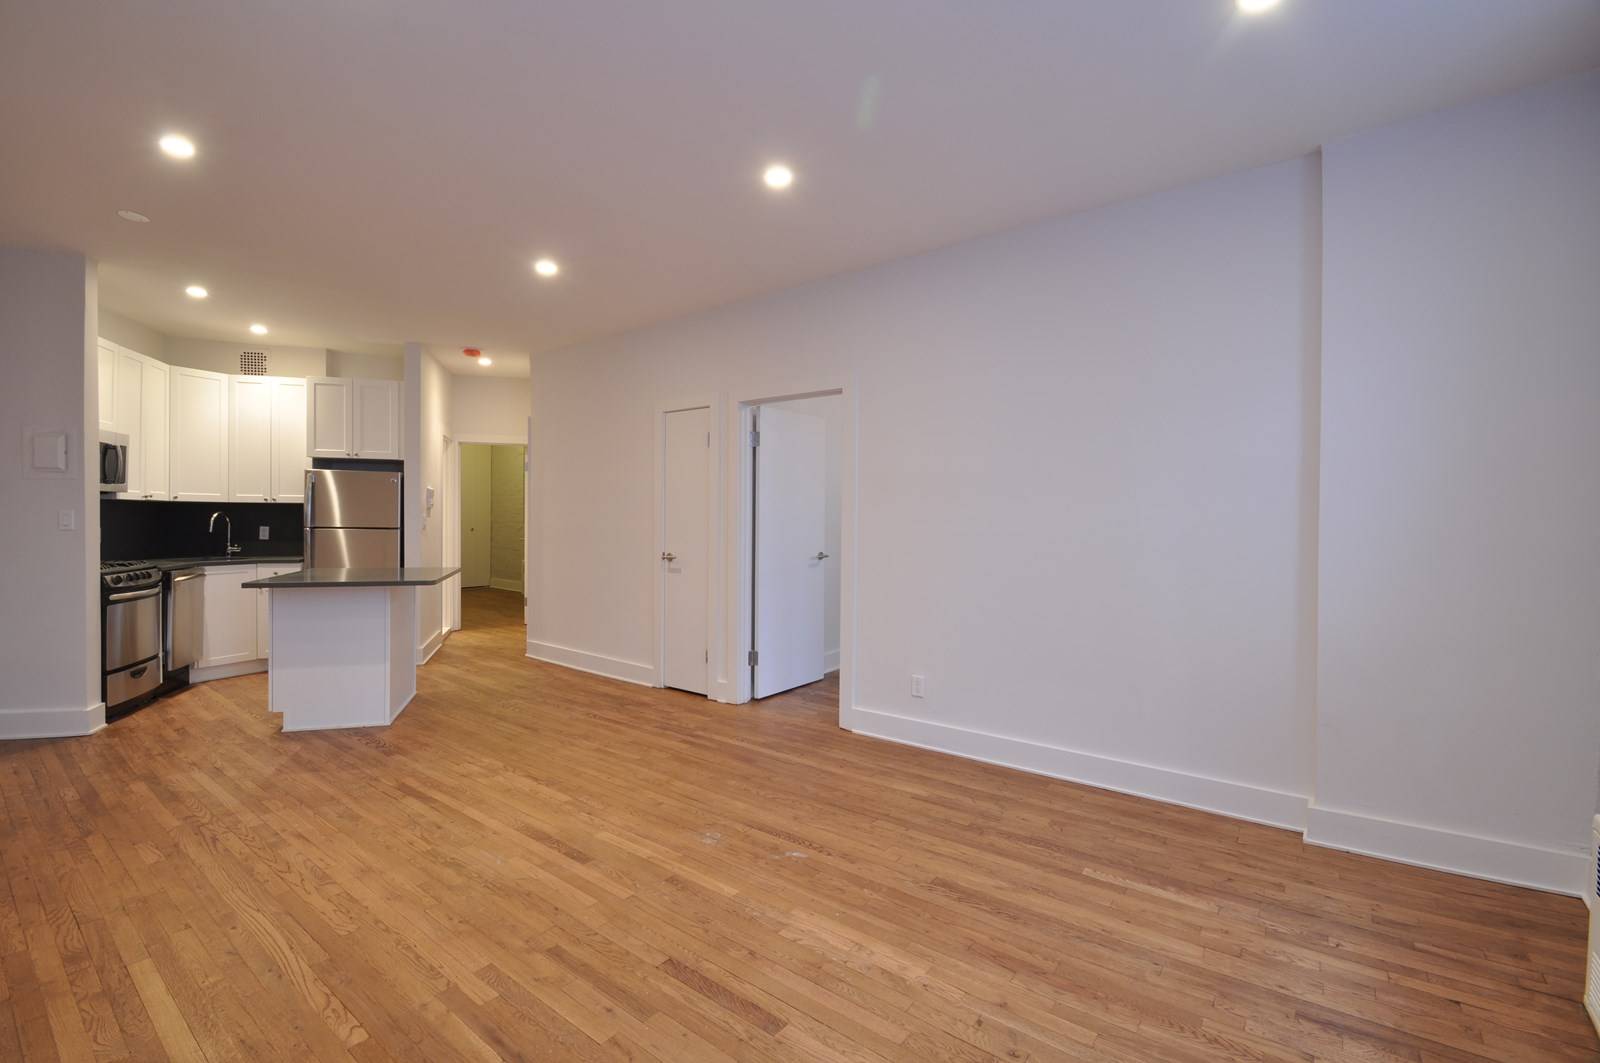 Classic 3BR/1BA in Historic Building on the Upper East Side